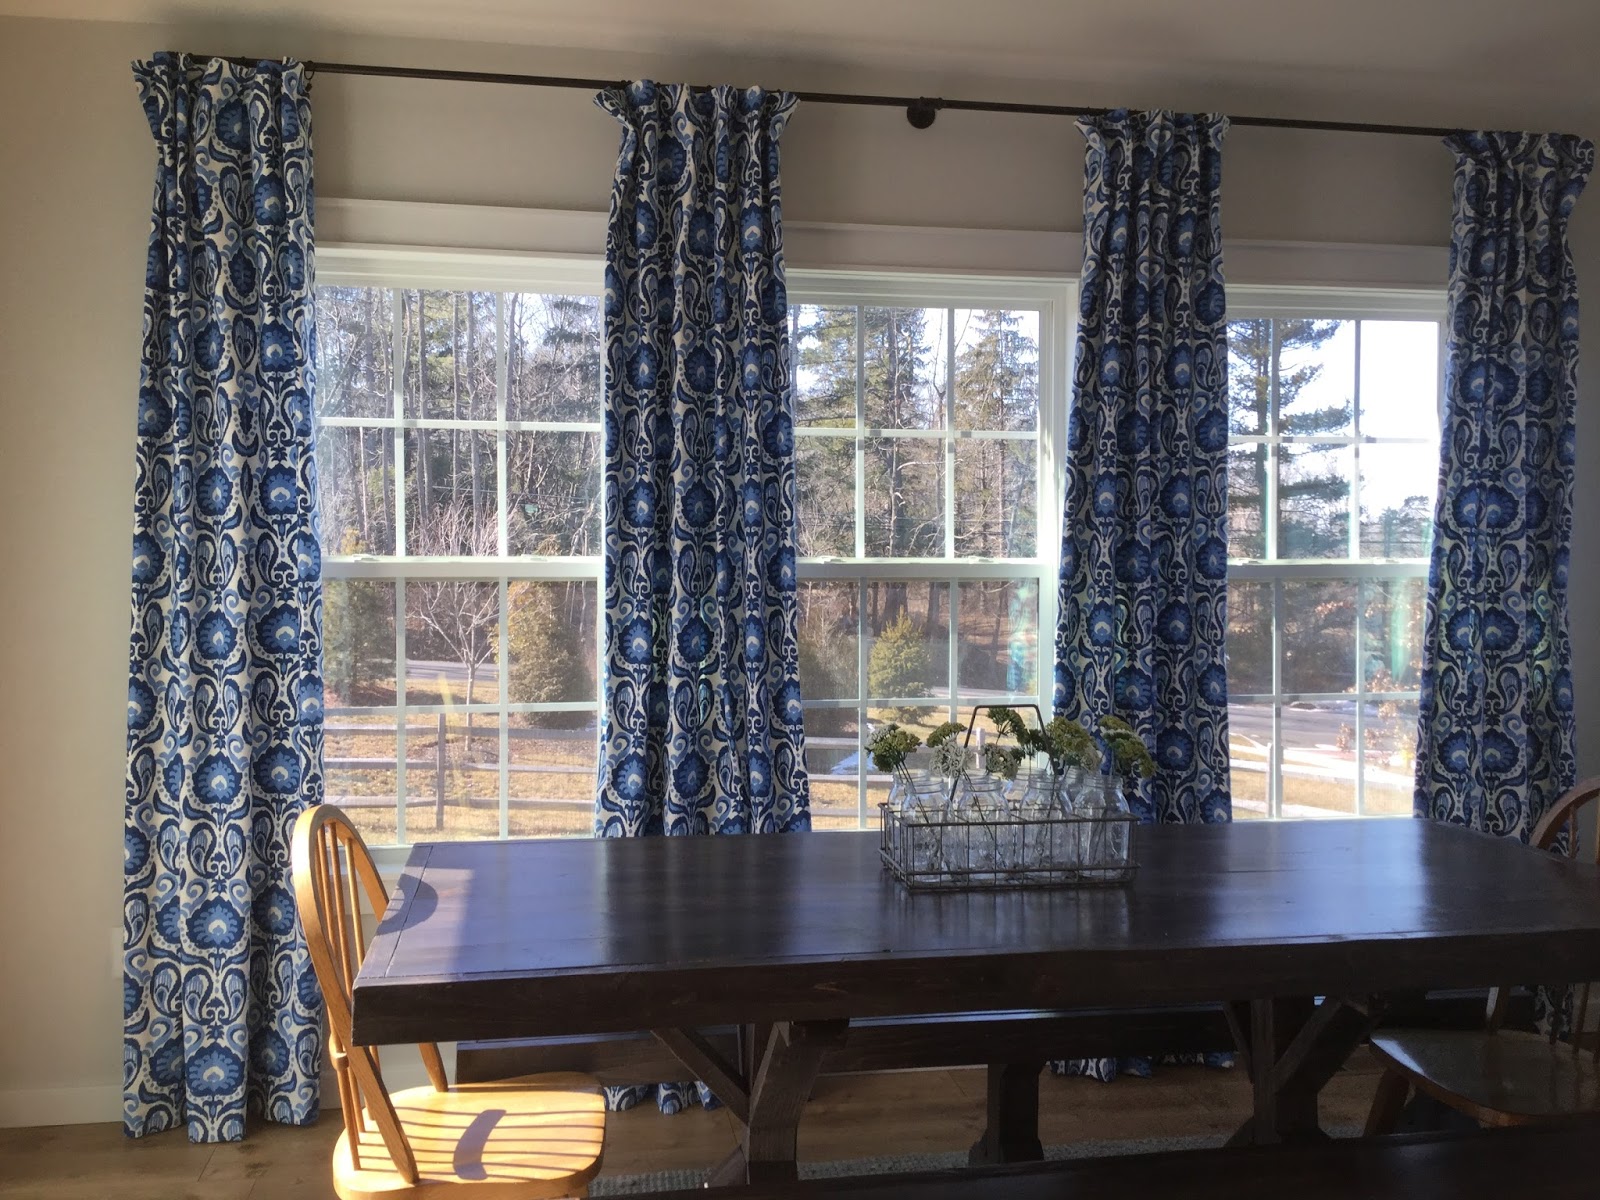 Window Trim and Curtains – Tips and How To (It's a long one